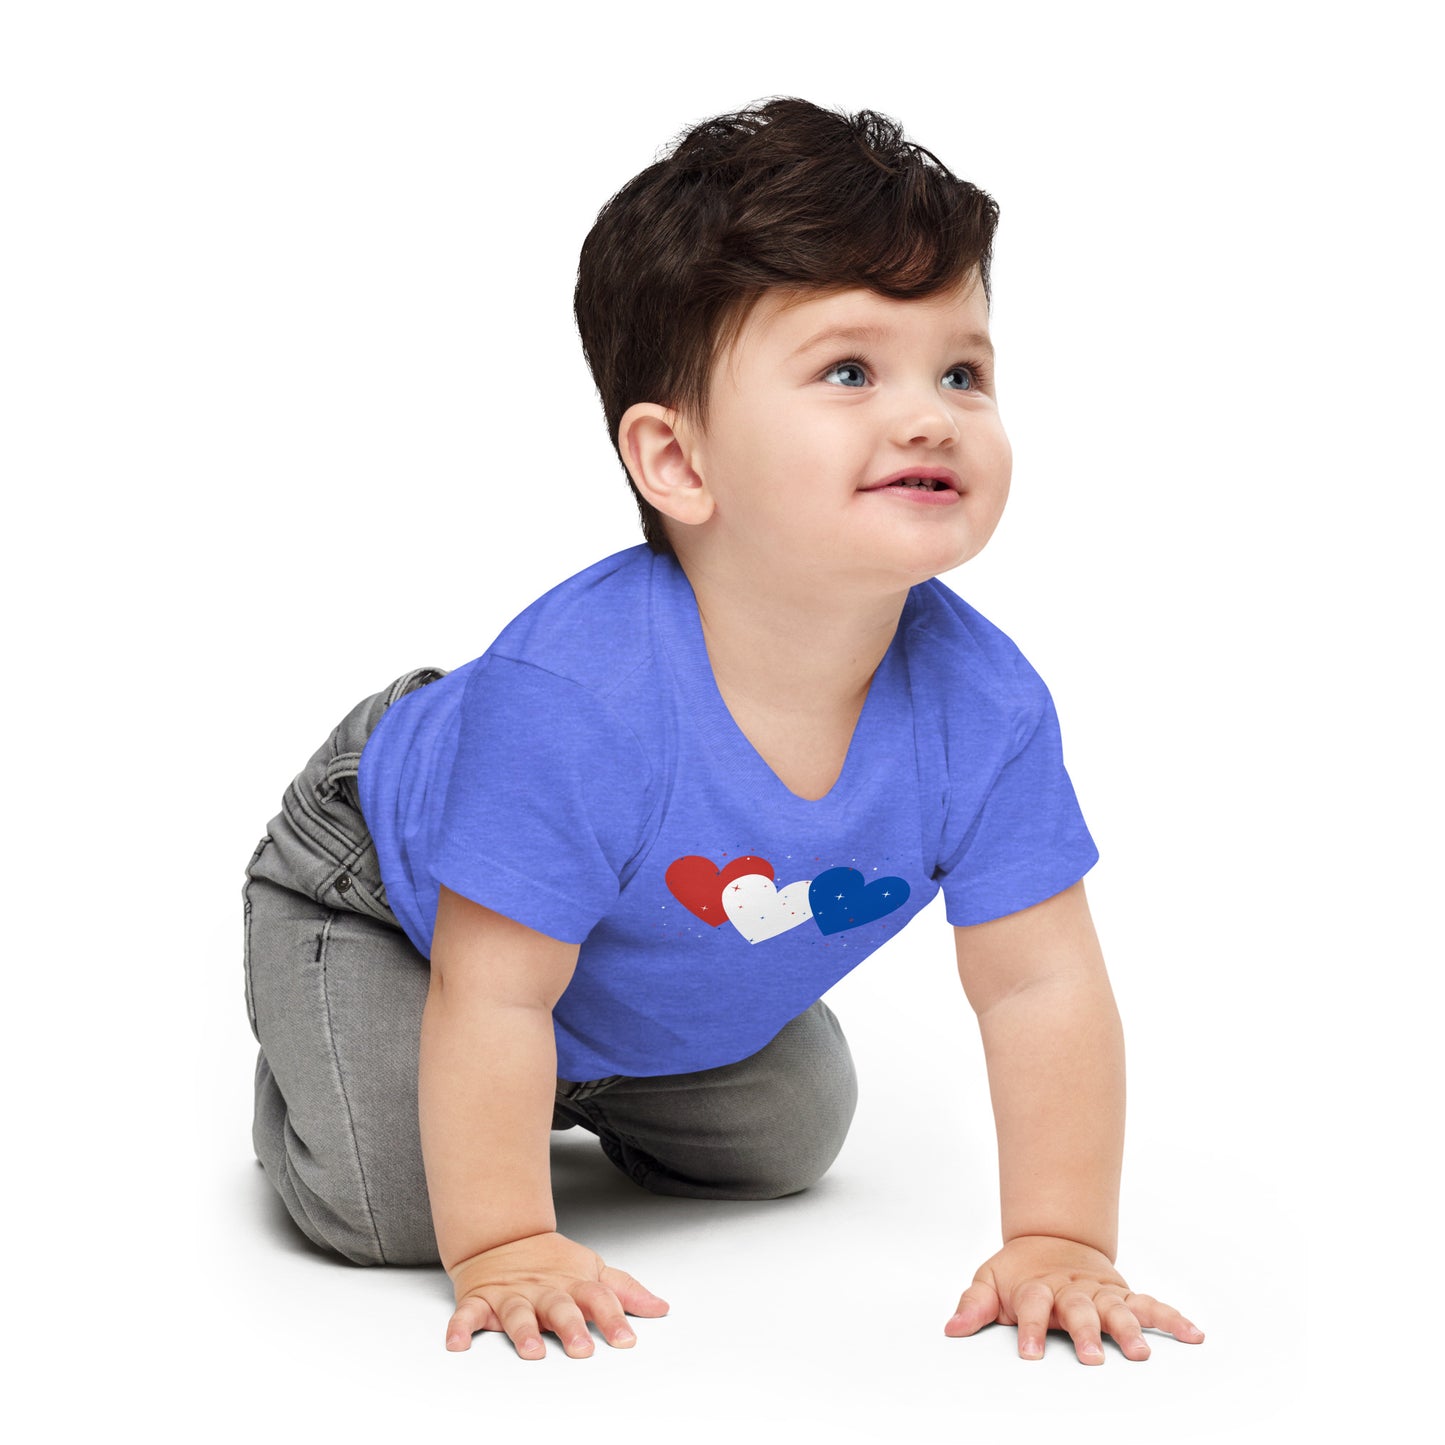 Red, white and blue hearts Baby Memorial Day Tee